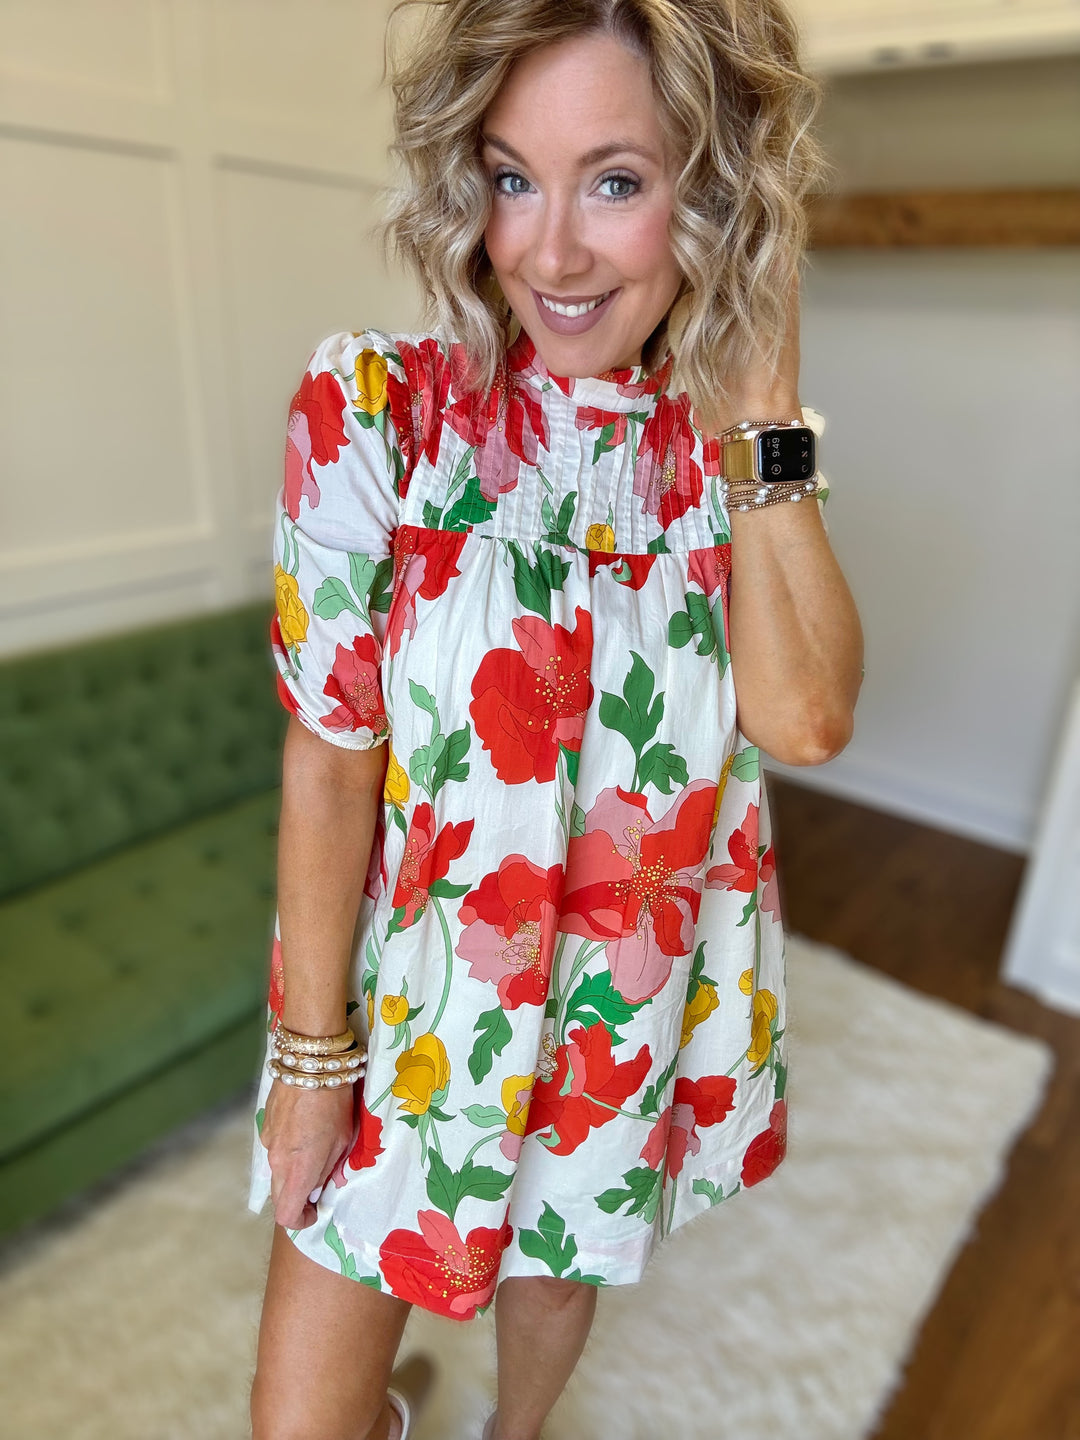 The Floral Shift Dress